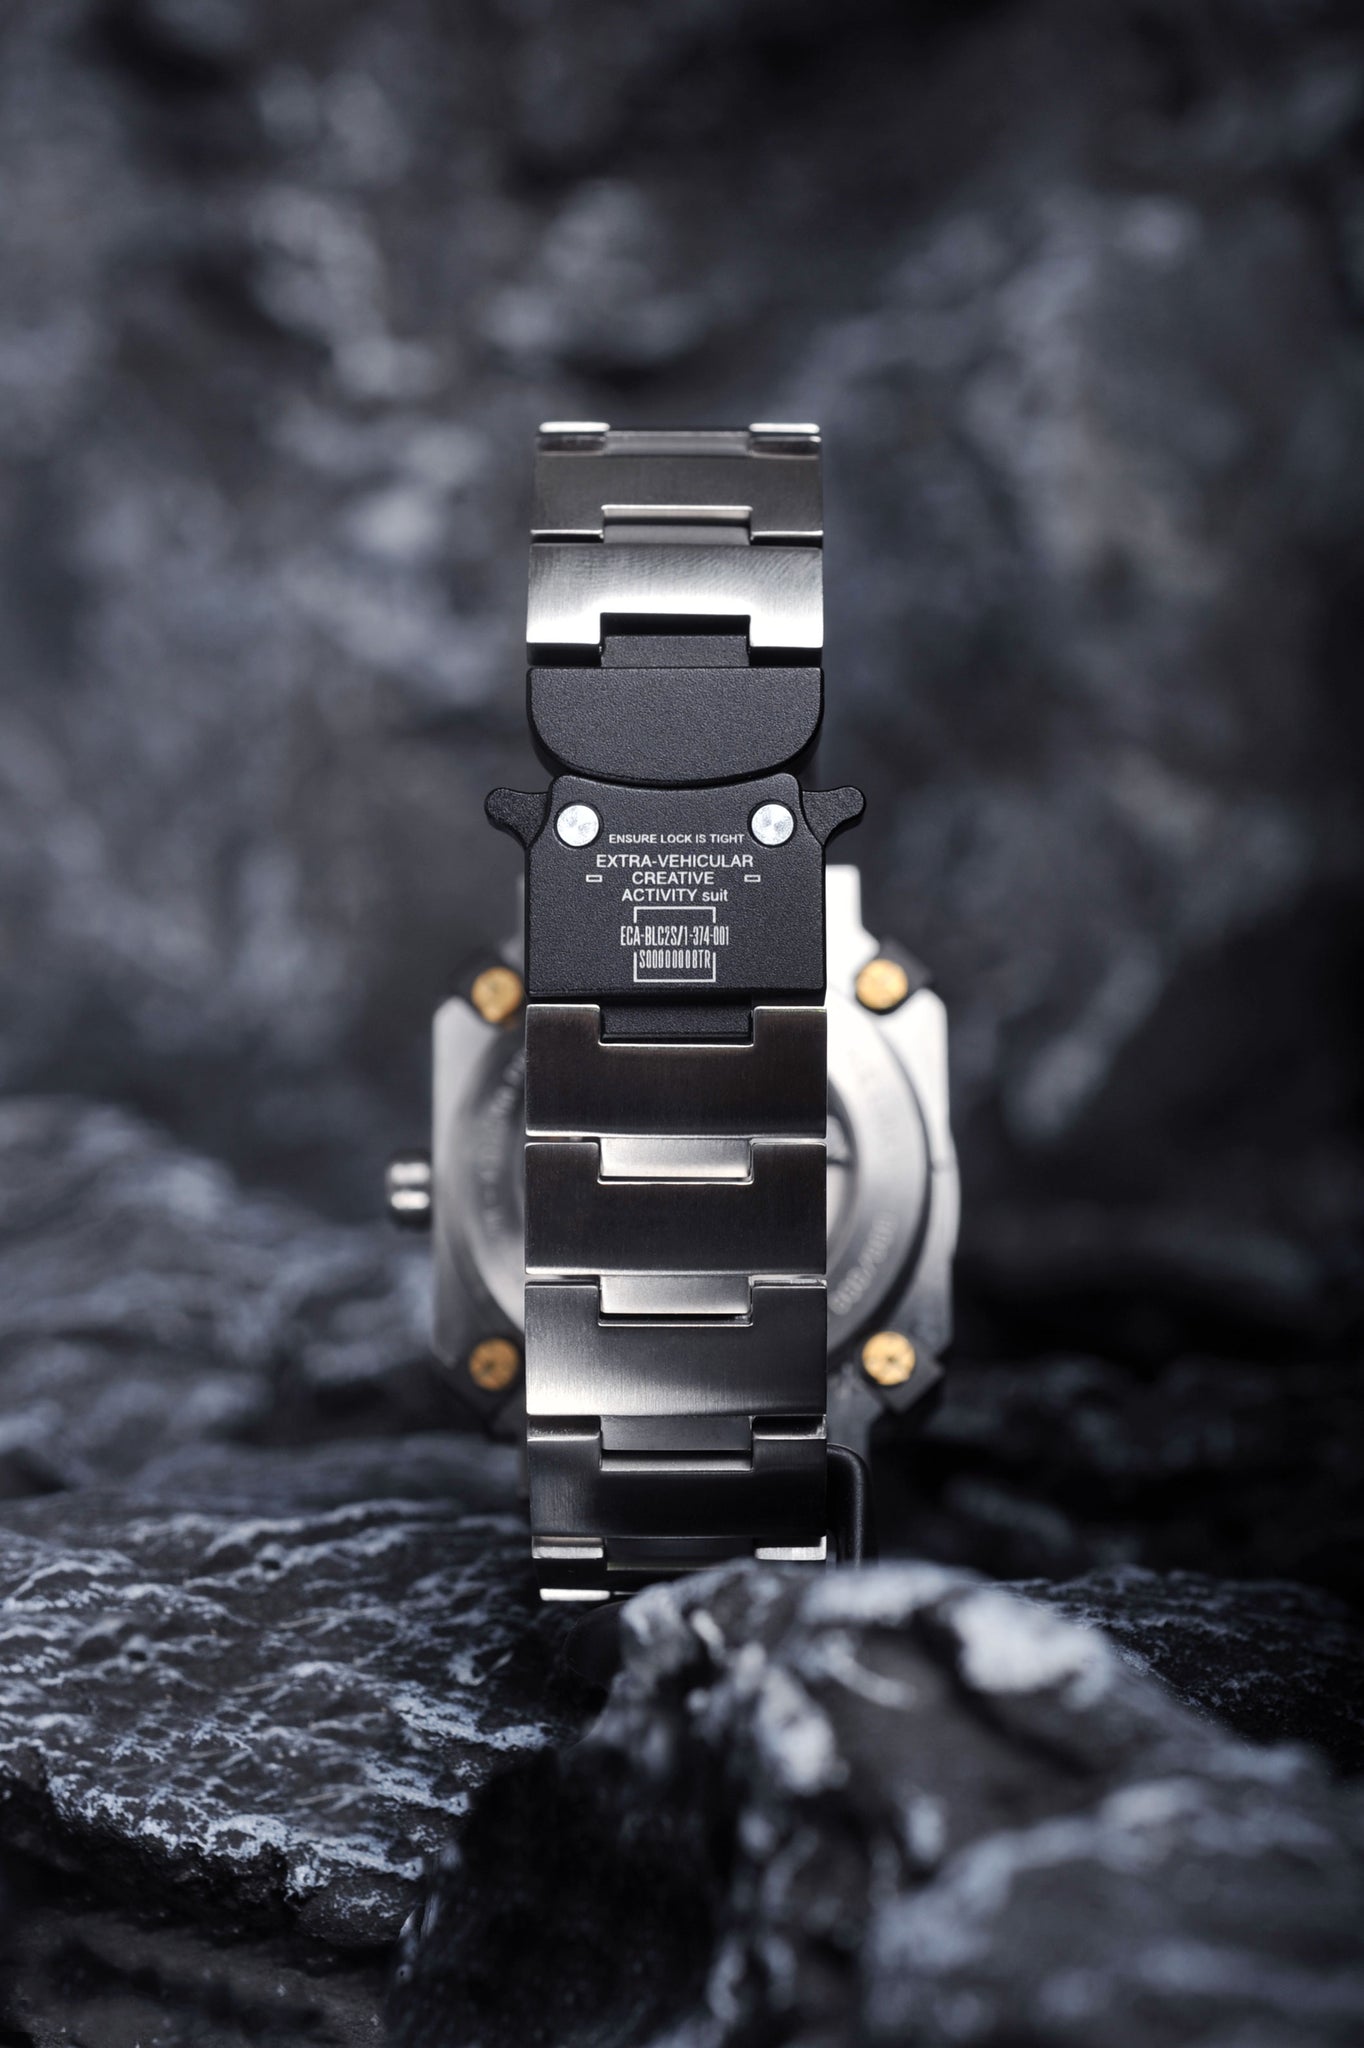 SPACE LUDENS includes two straps for different styling: a stainless steel bracelet featuring the buckle straps of the Ludens; and a carbon fiber pattern leather strap for lighter activities. The choice of carbon fiber printed is a reflection on the skull mask motif of Ludens